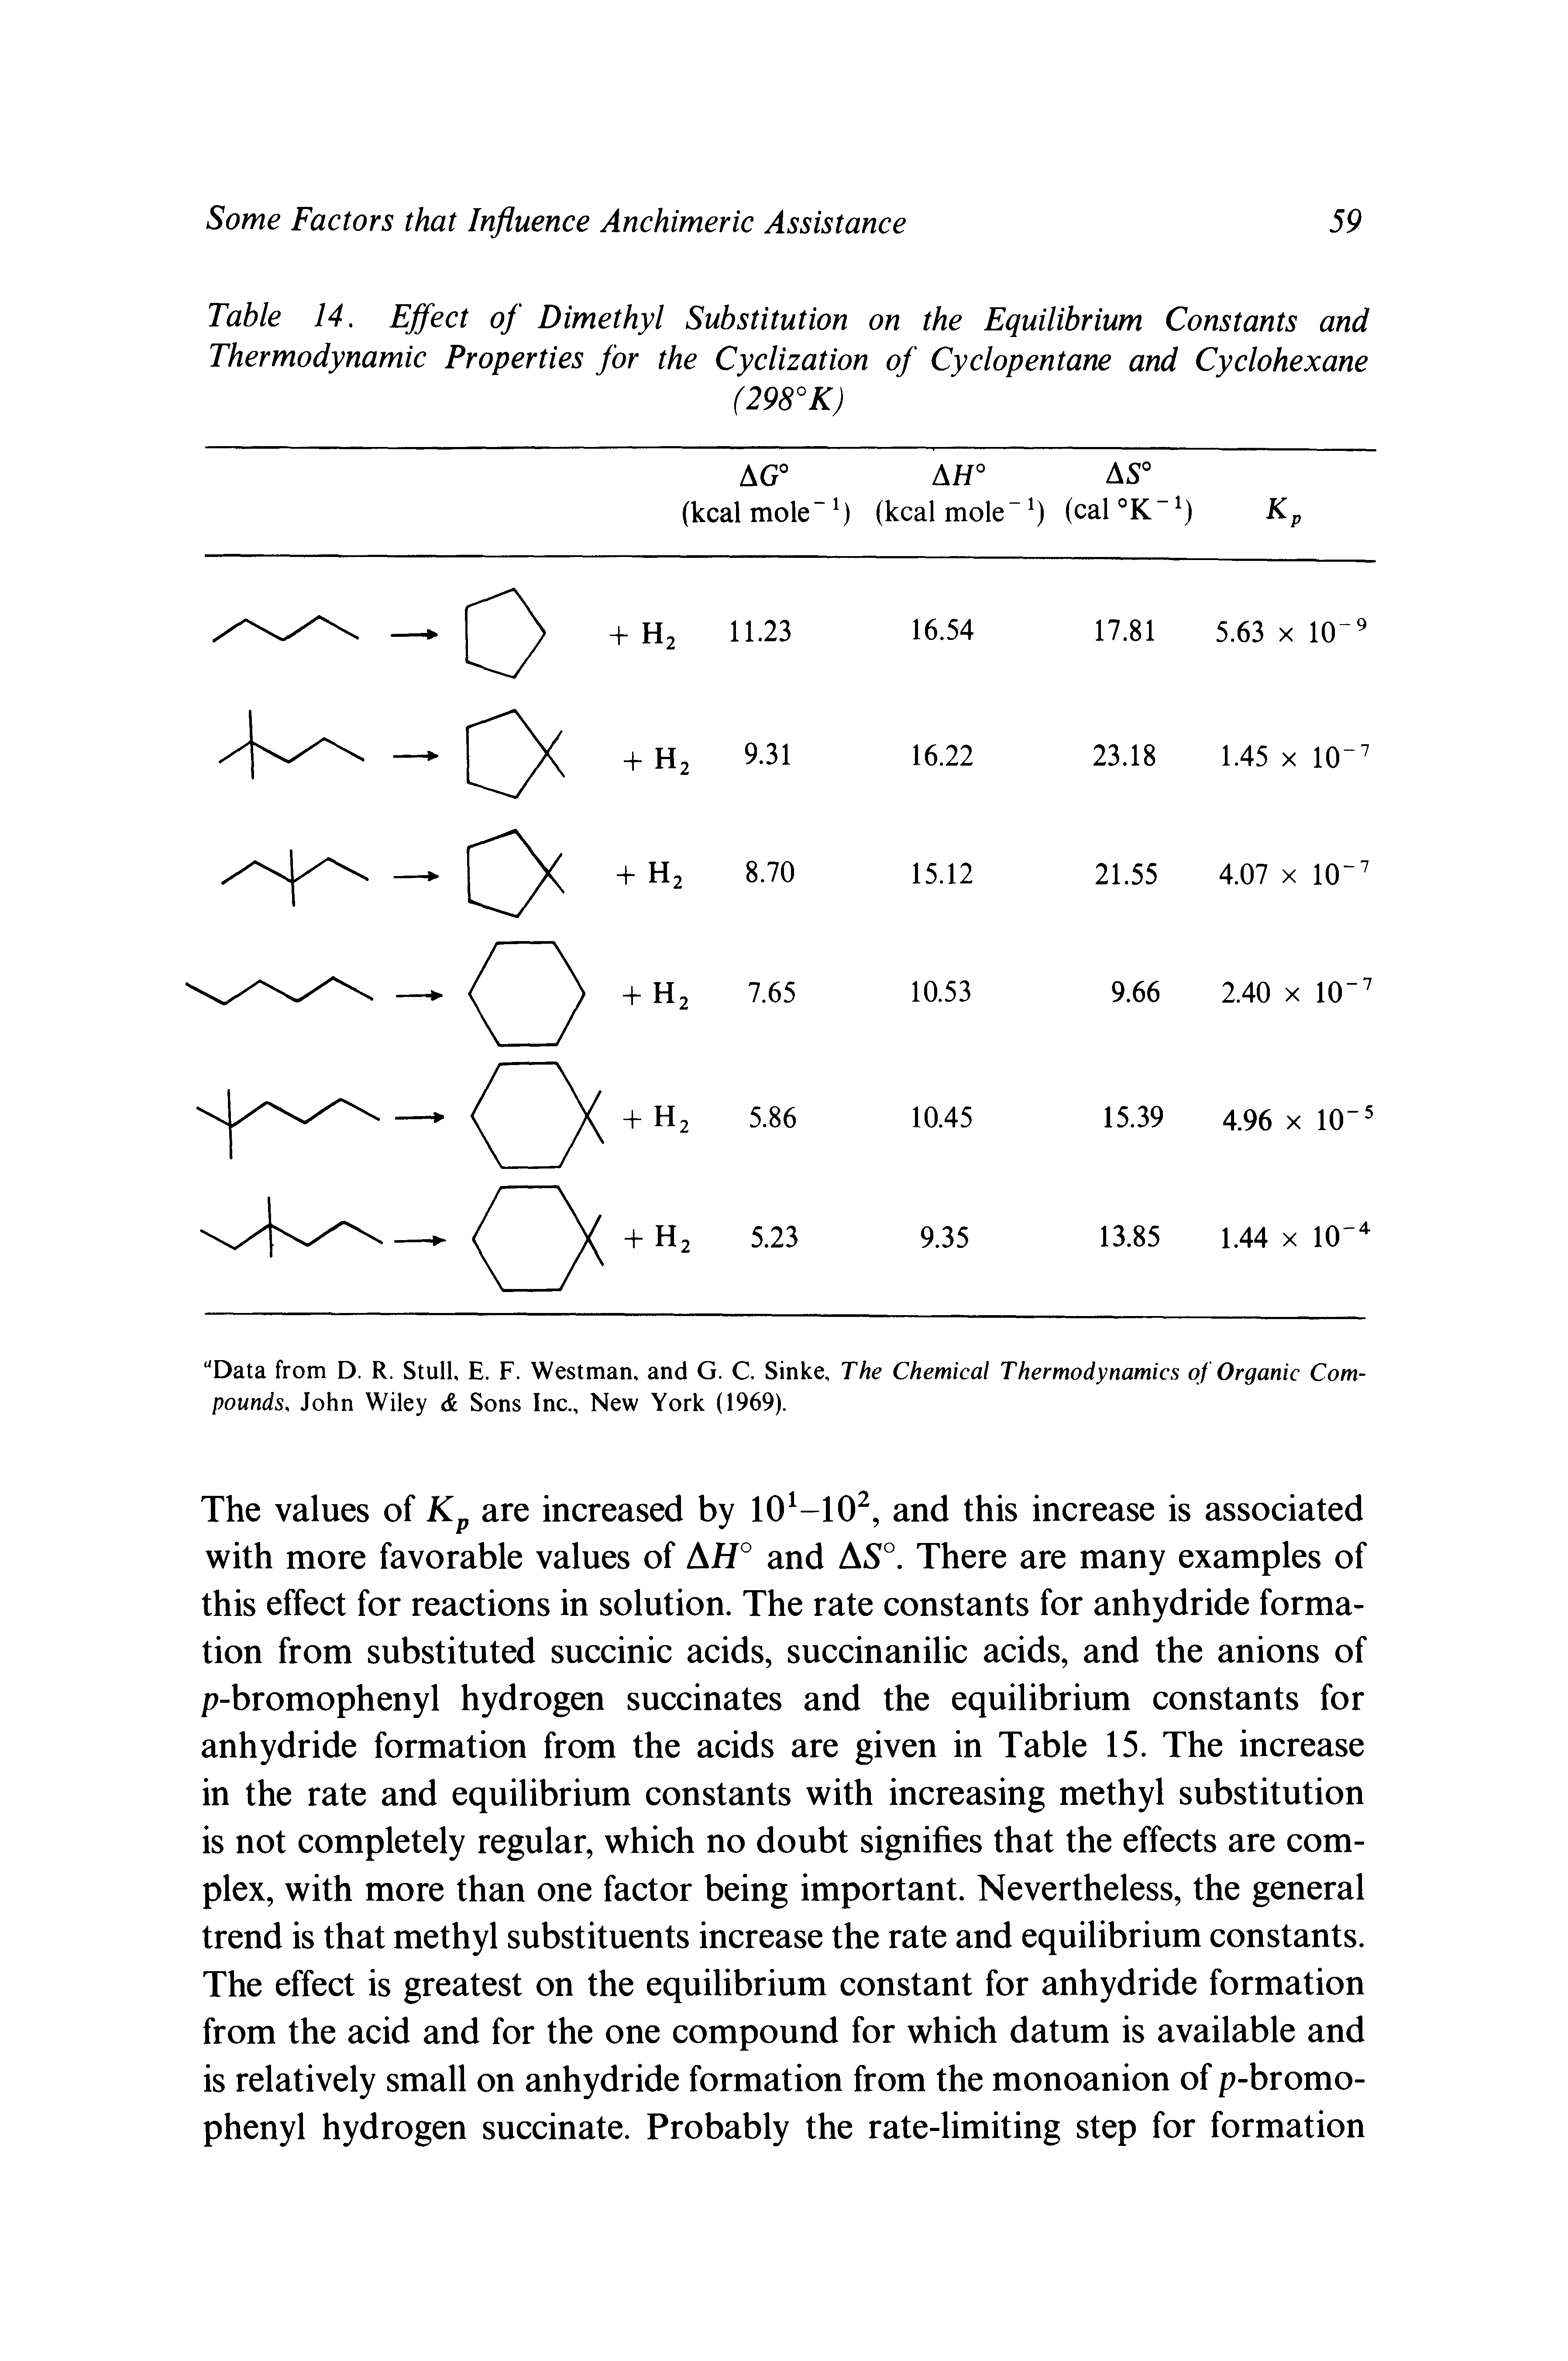 Table 14. Effect of Dimethyl Substitution on the Equilibrium Constants and Thermodynamic Properties for the Cyclization of Cyclopentane and Cyclohexane...